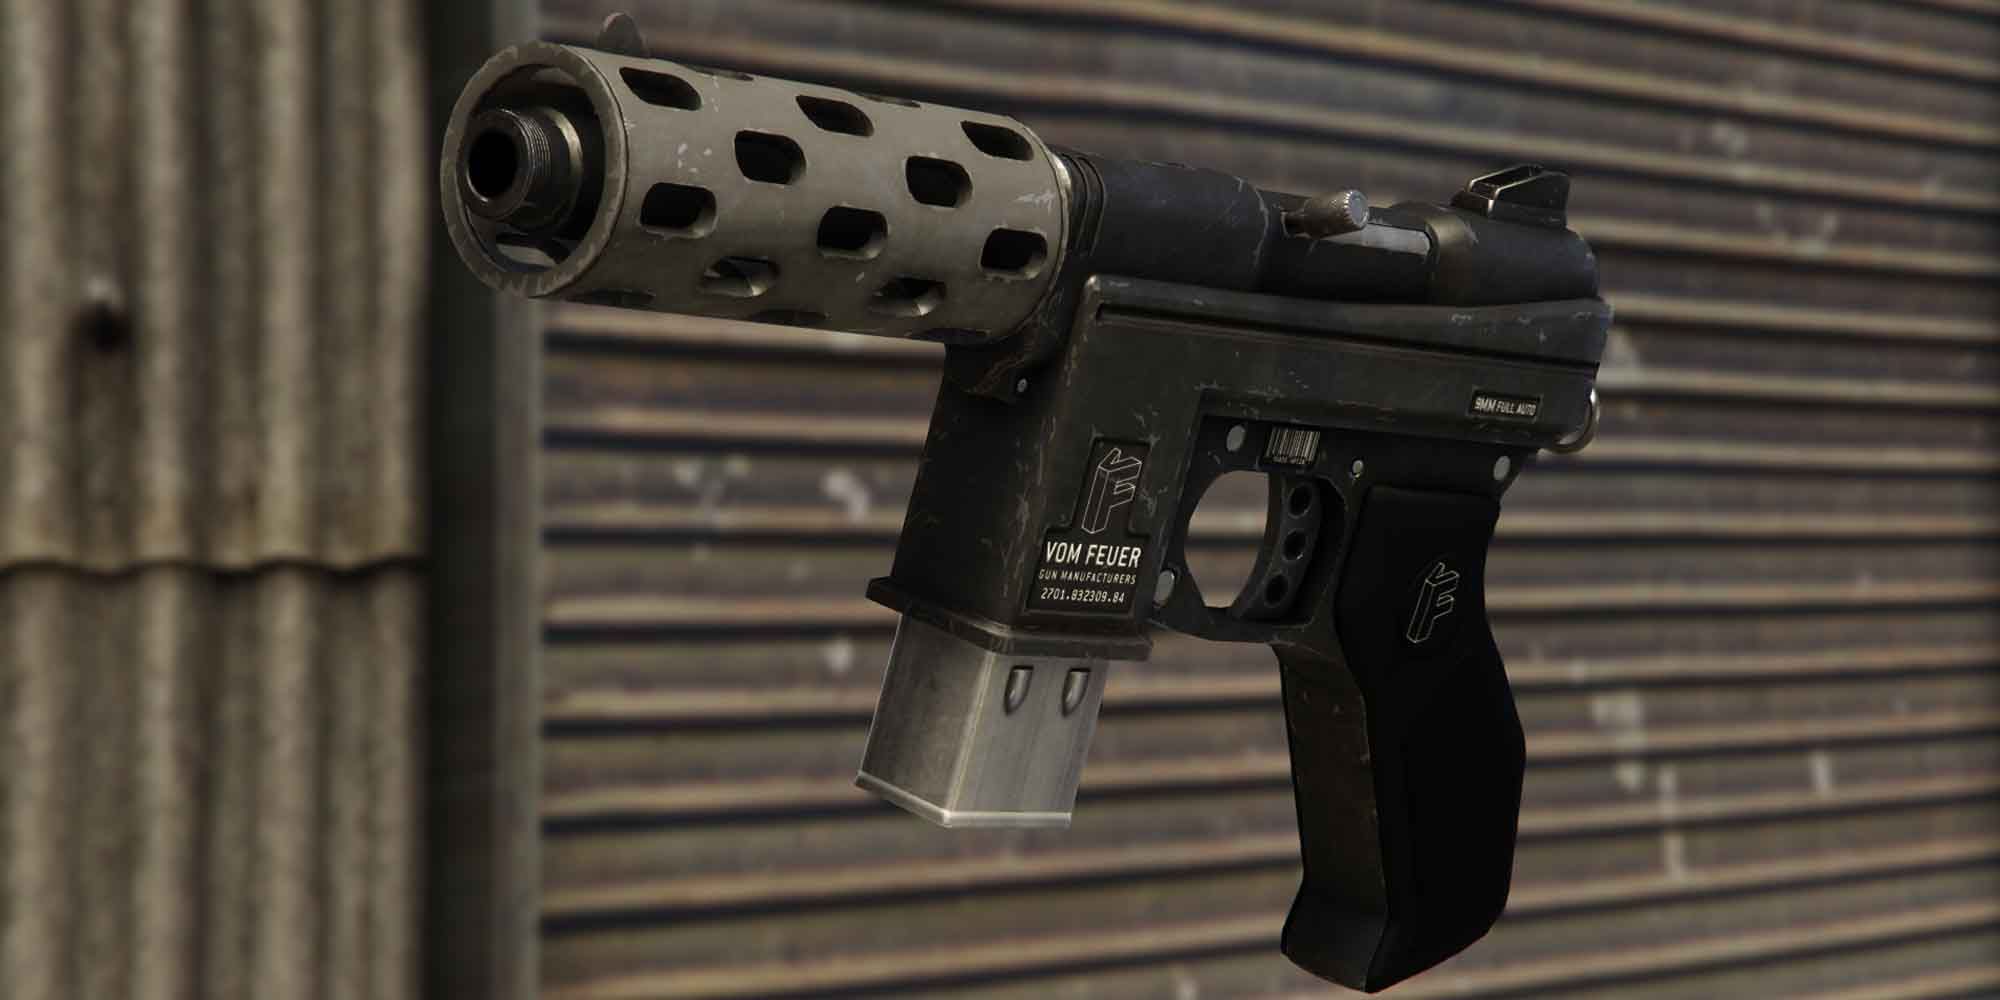 The Machine Pistol in GTA 5 is modelled after the real-life Tec-9